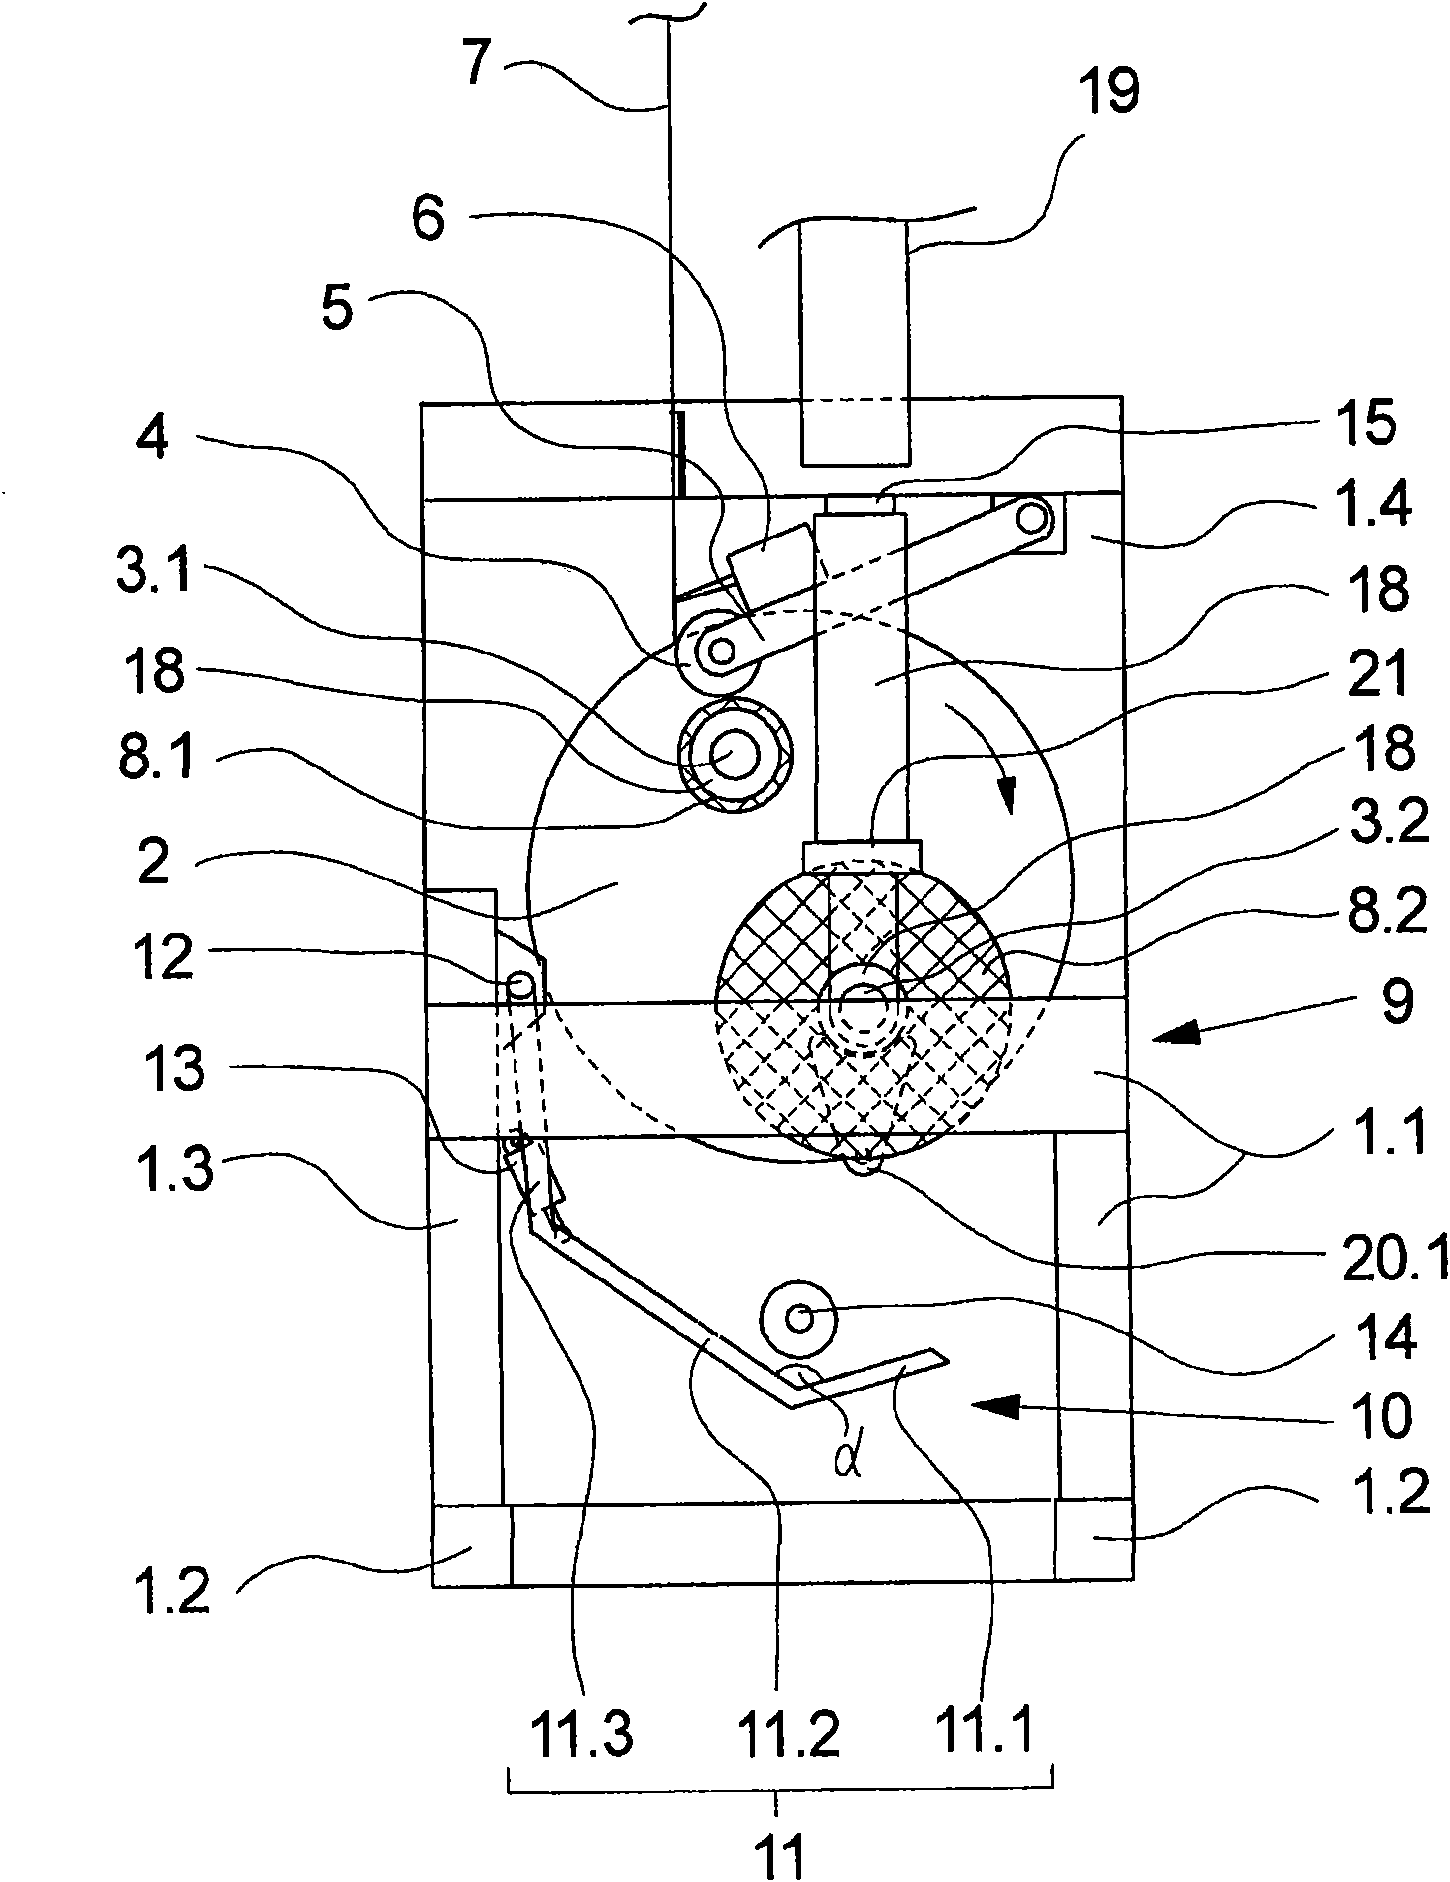 Apparatus for winding up a thread